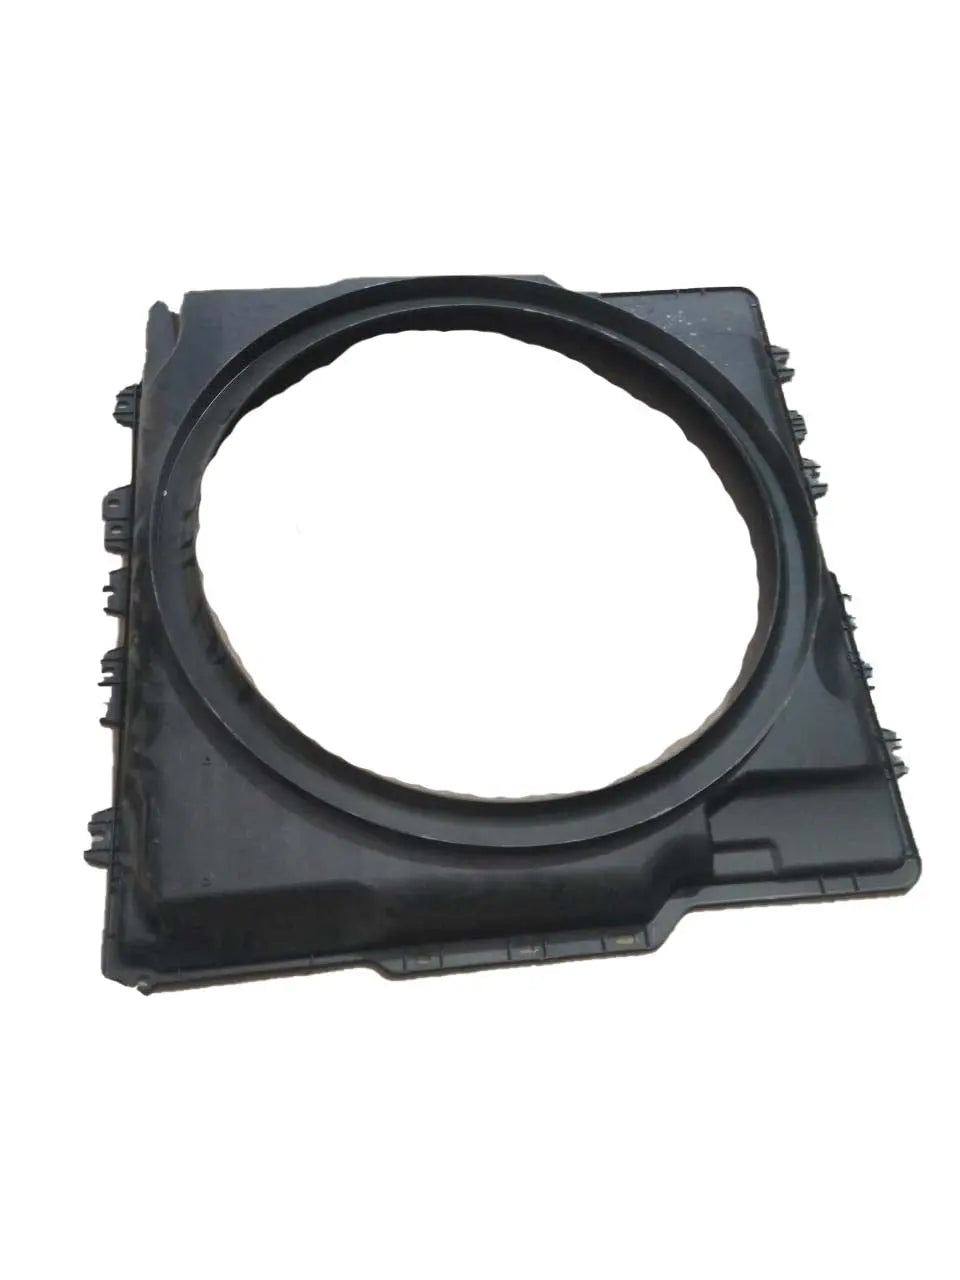 CHINA Factory Wholesale 9605053055 RADIATOR FAN RING COVER For MERCEDES BENZ FANCHANTS China Auto Parts Wholesales